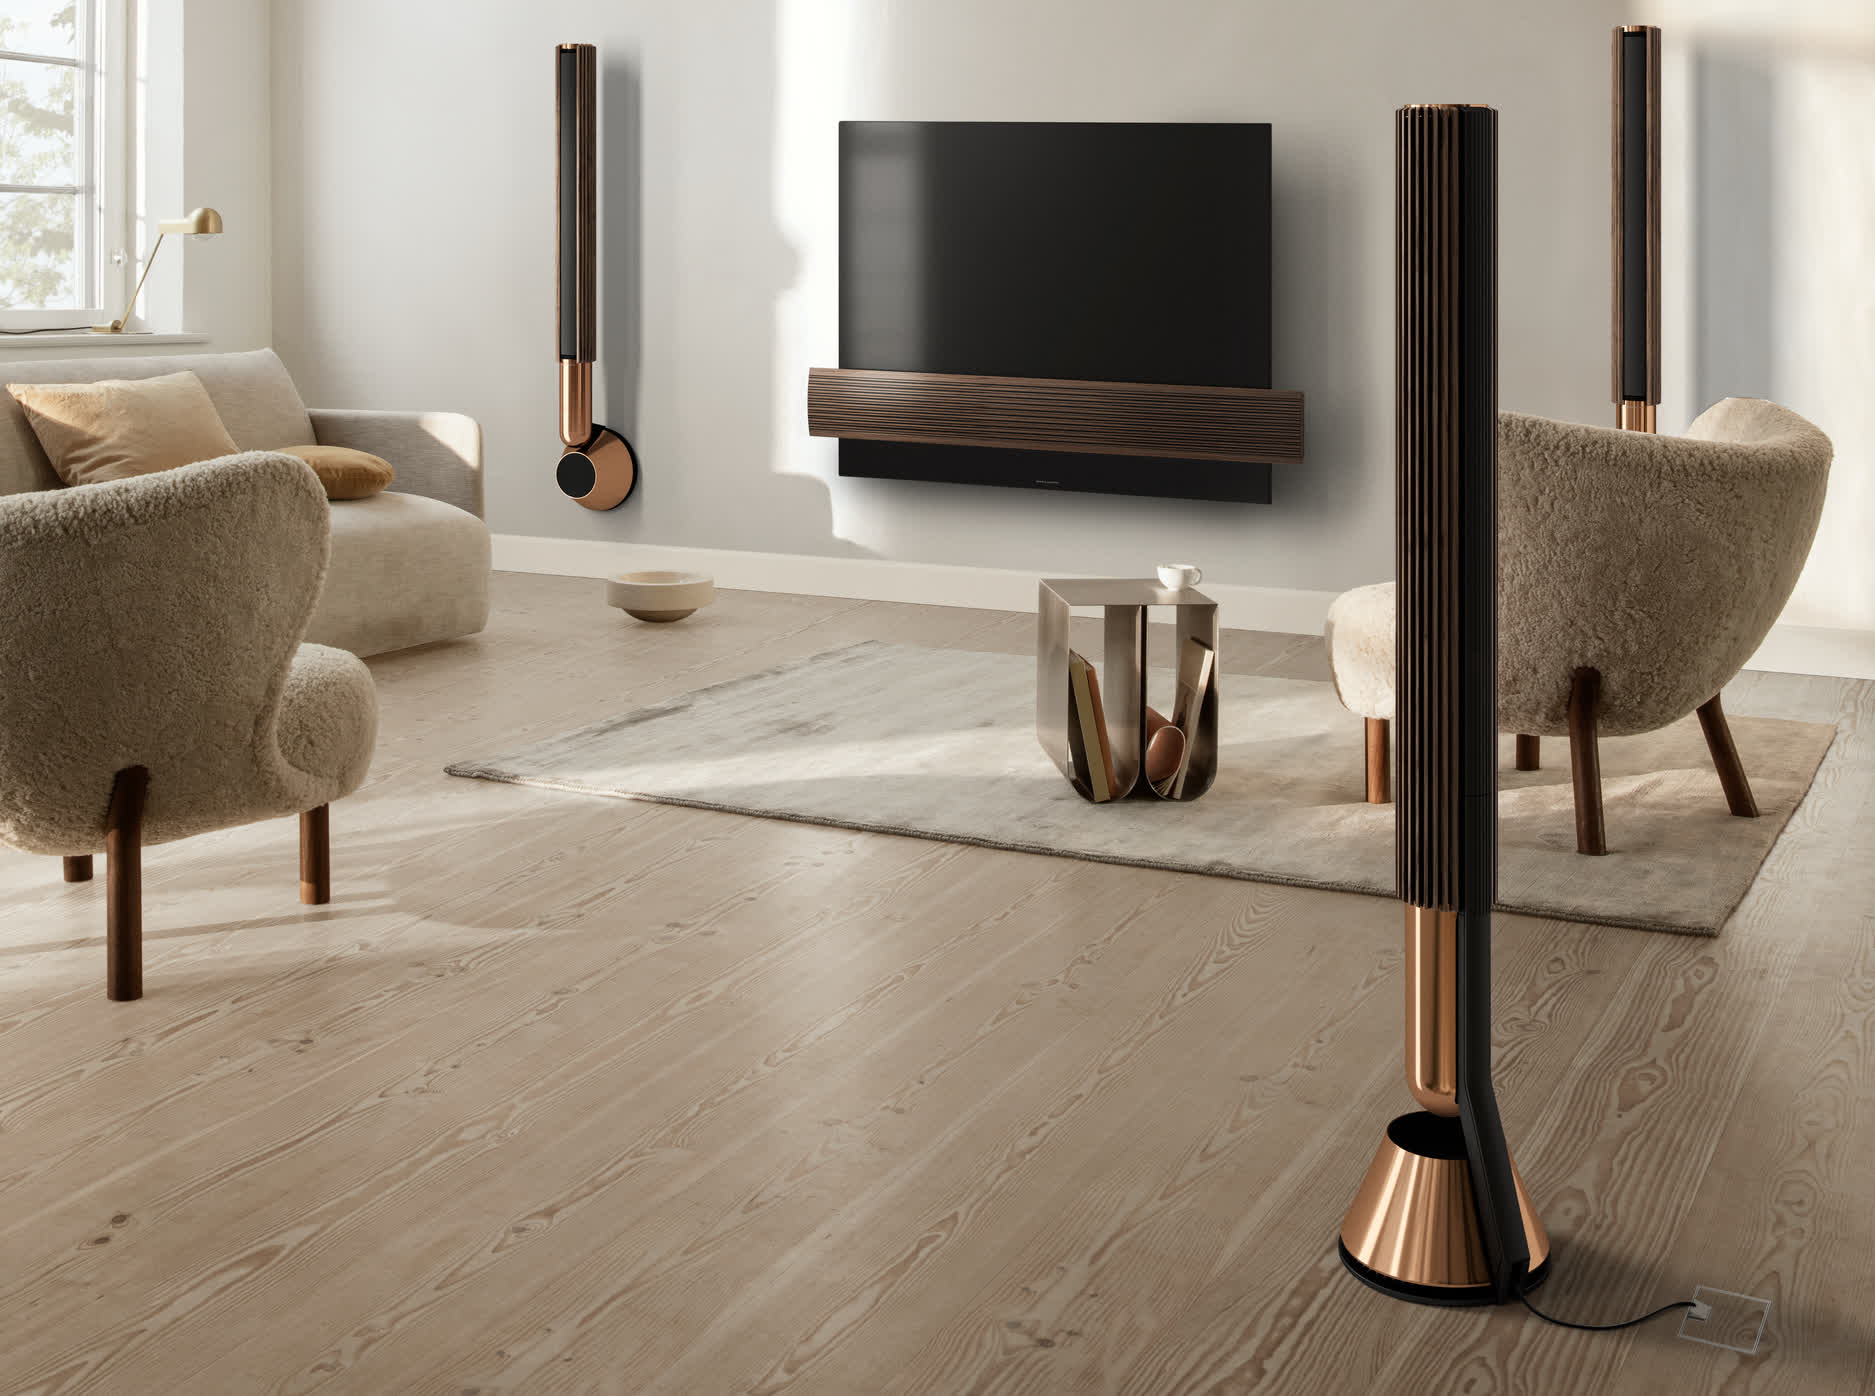 Bang & Olufsen latest wireless speaker is the column-shaped Beolab 28